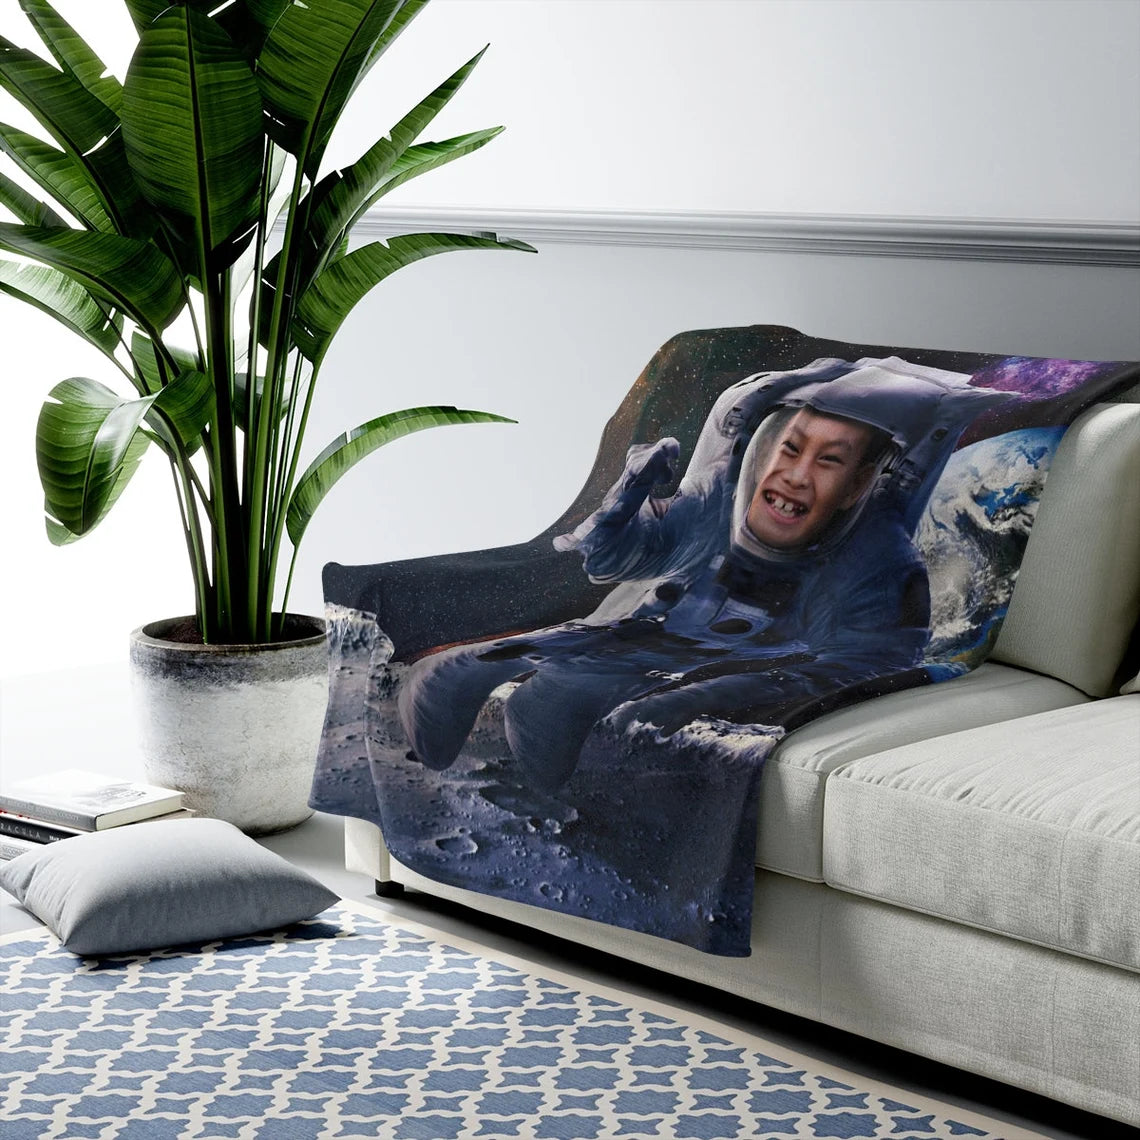 The Astronaut Over the Moon Blanket